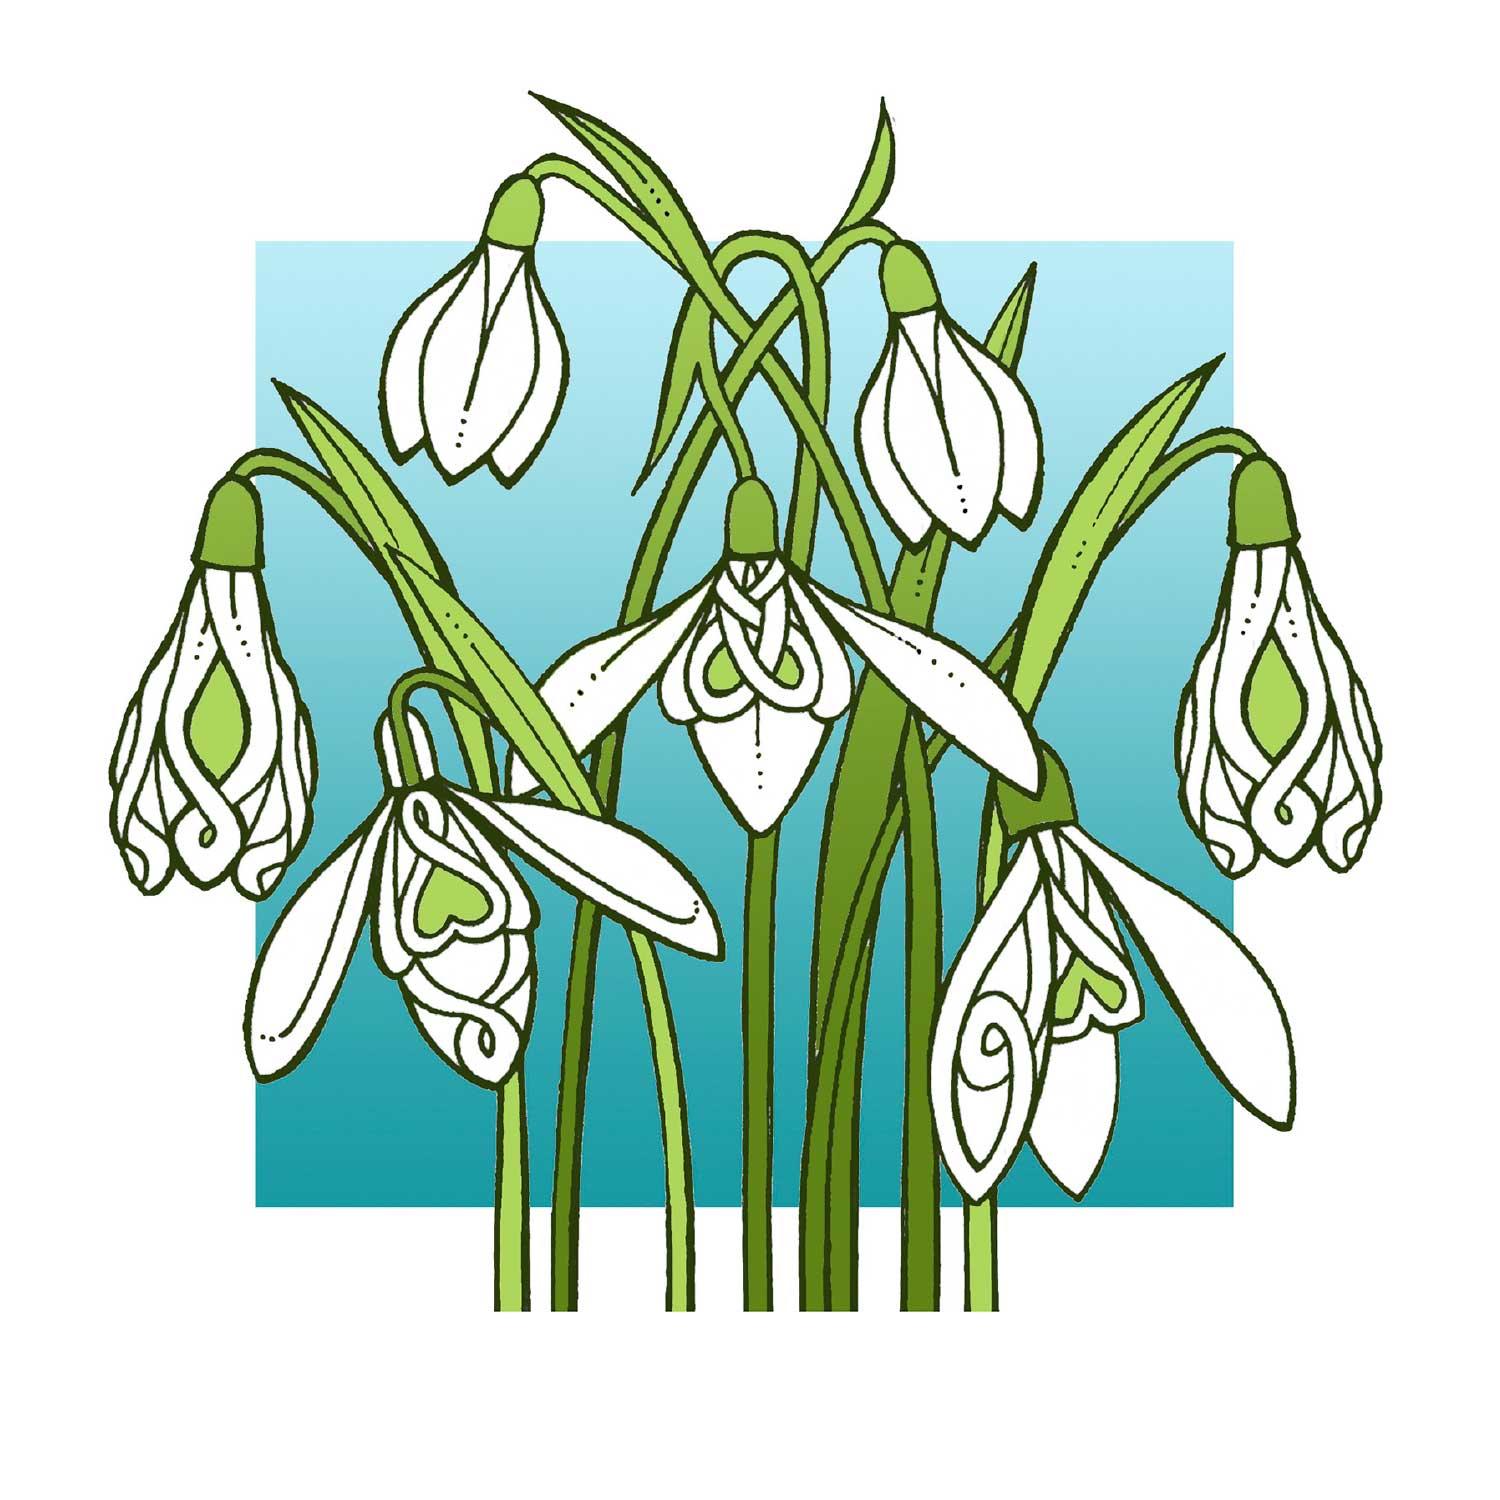 Snowdrops by artist Marjory Tait